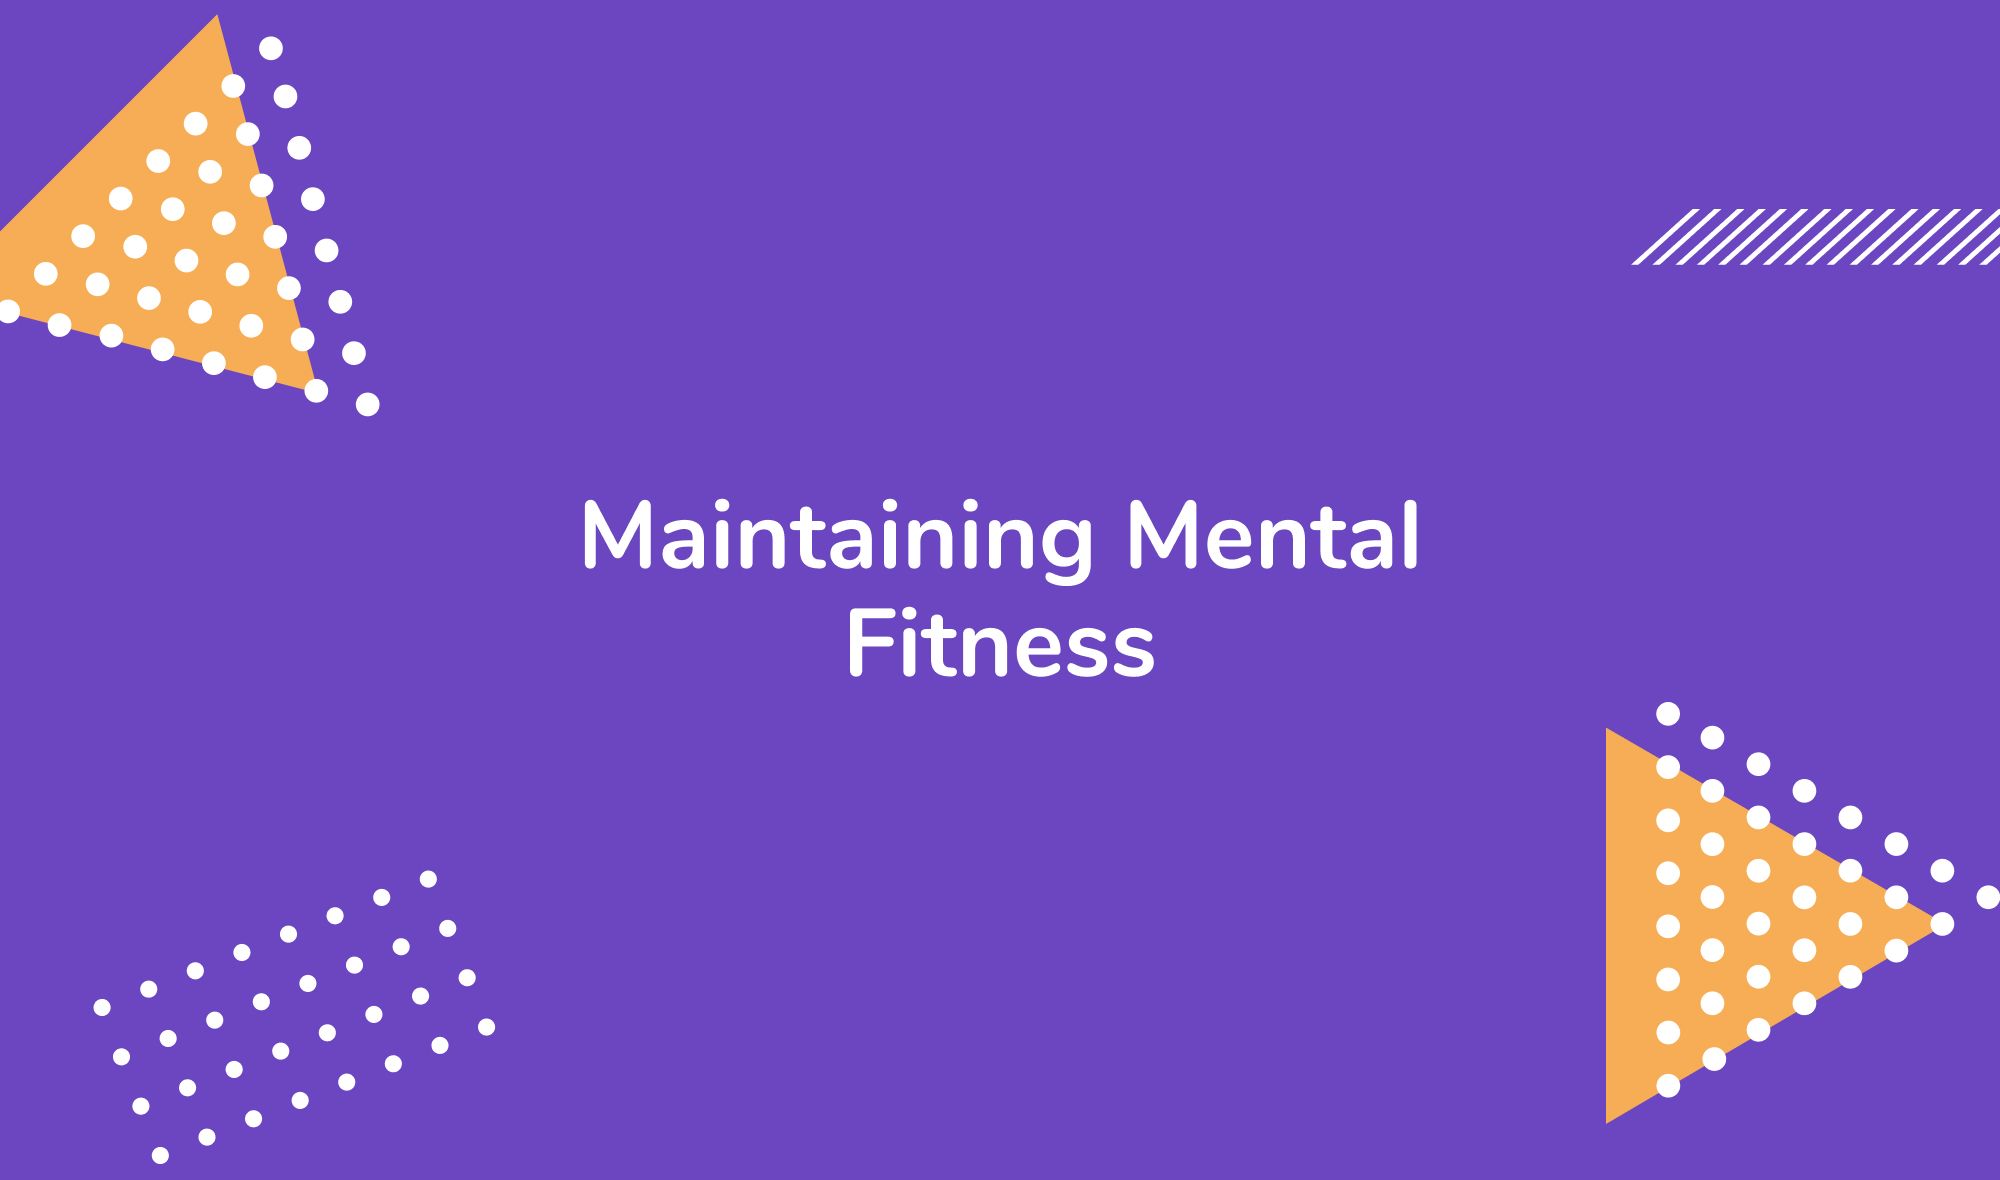 Maintaining Mental Fitness: A Lifestyle Approach